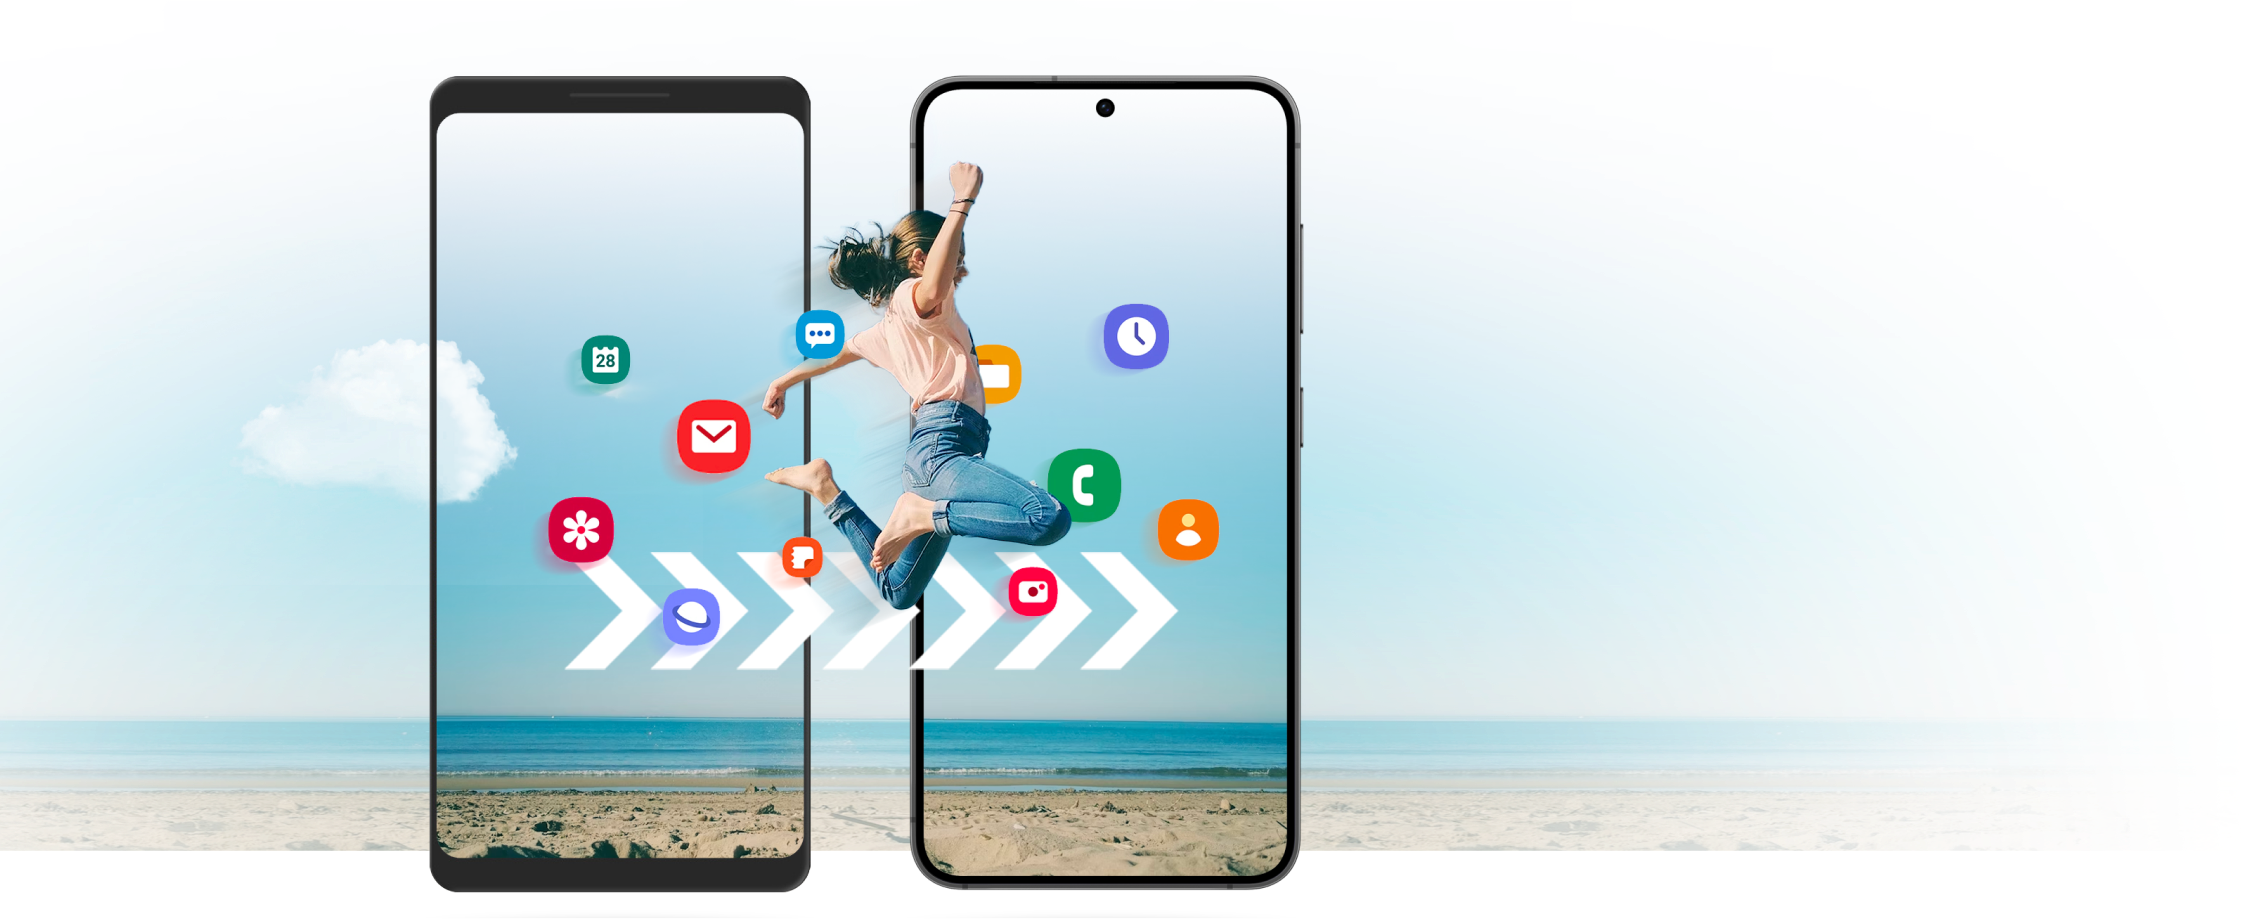 Two mobile phones with illustrated icons and a woman jumping from screen to screen to illustrate moving your contents from one device to another.